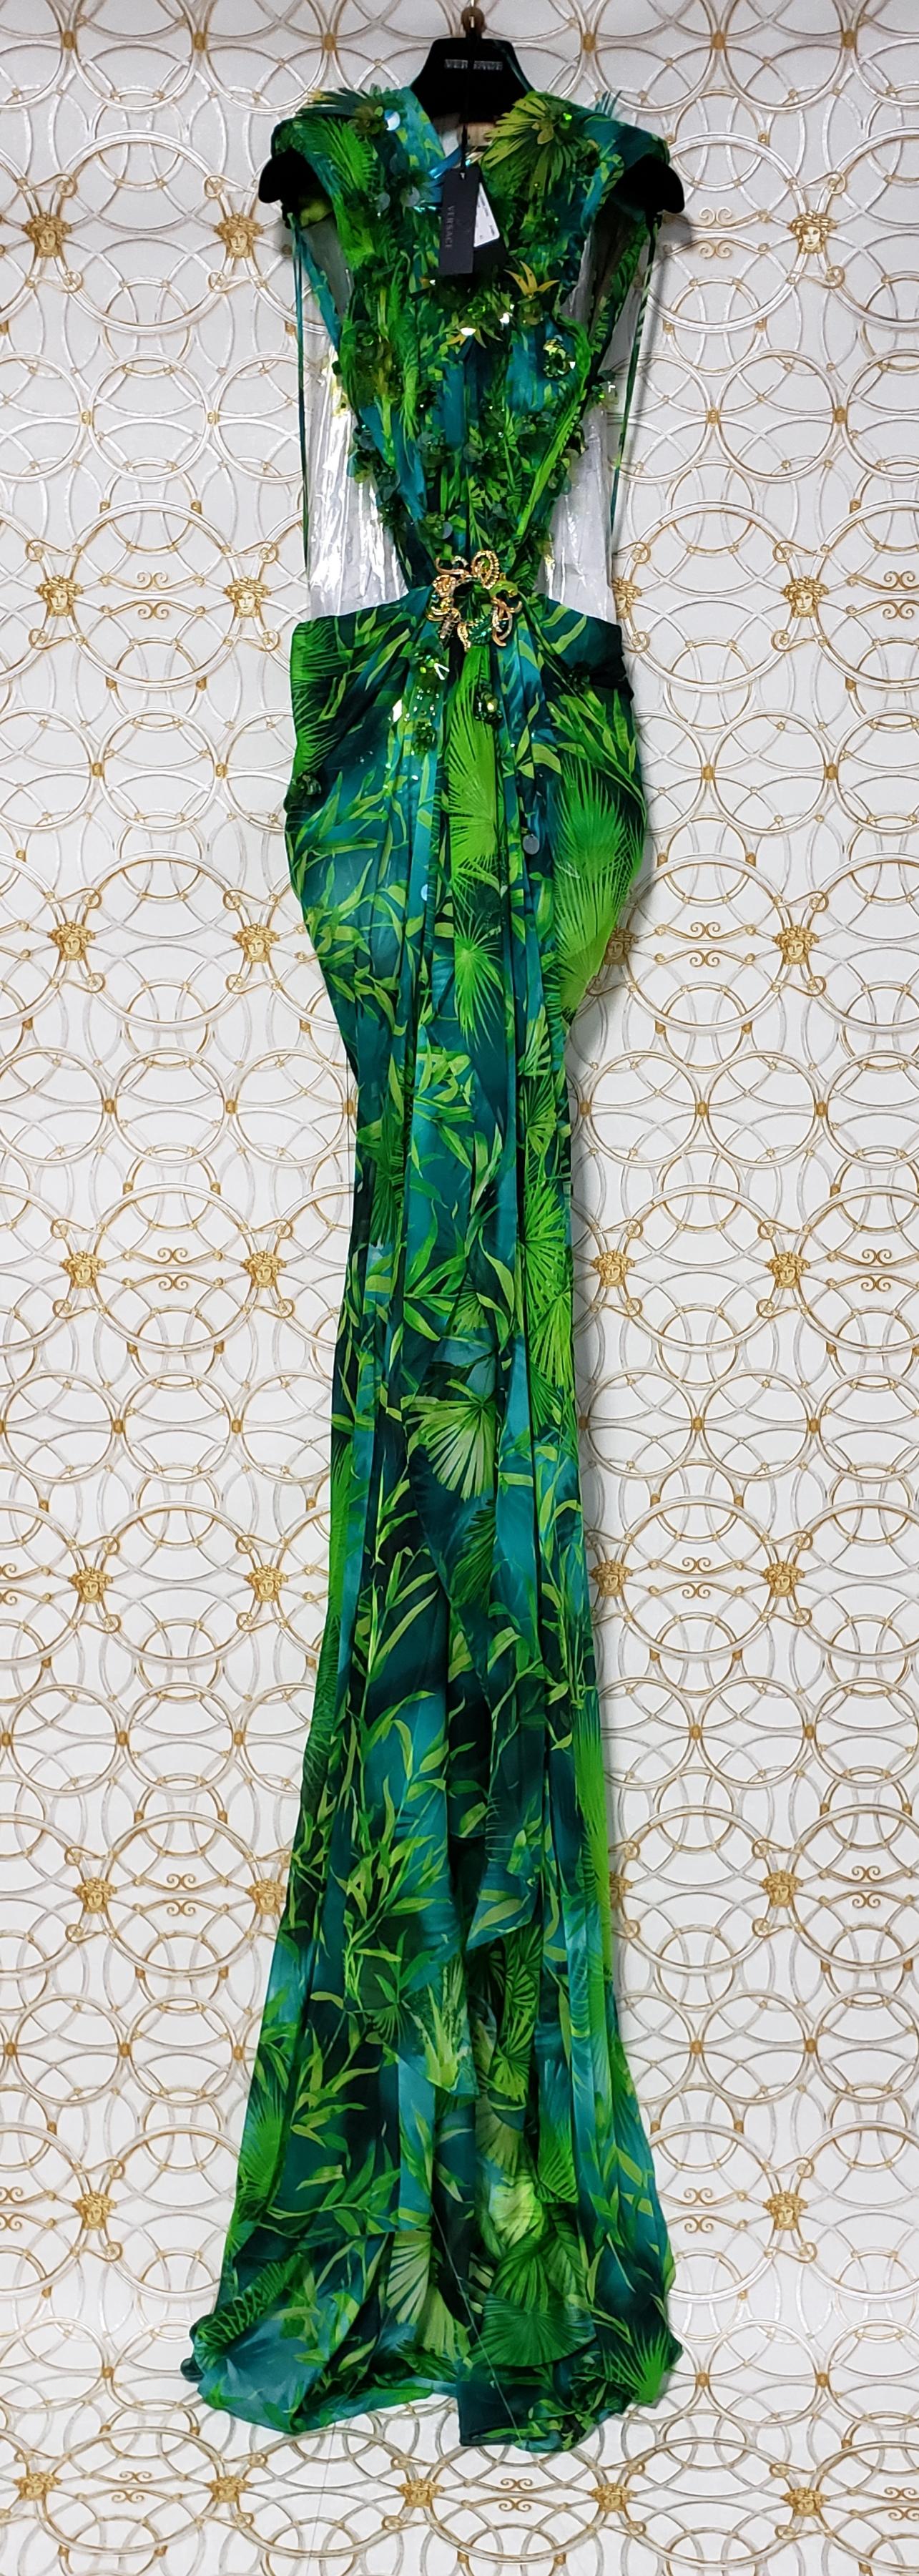 “Okay, Google, now show me the real jungle dress,”

Here is The Dress that Jennifer Lopez wore for the finalee of S/S 2020 Versace Runway Show in Milan.

Add a piece of fashion history to your wardrobe with this timeless silk dress. The silhouette